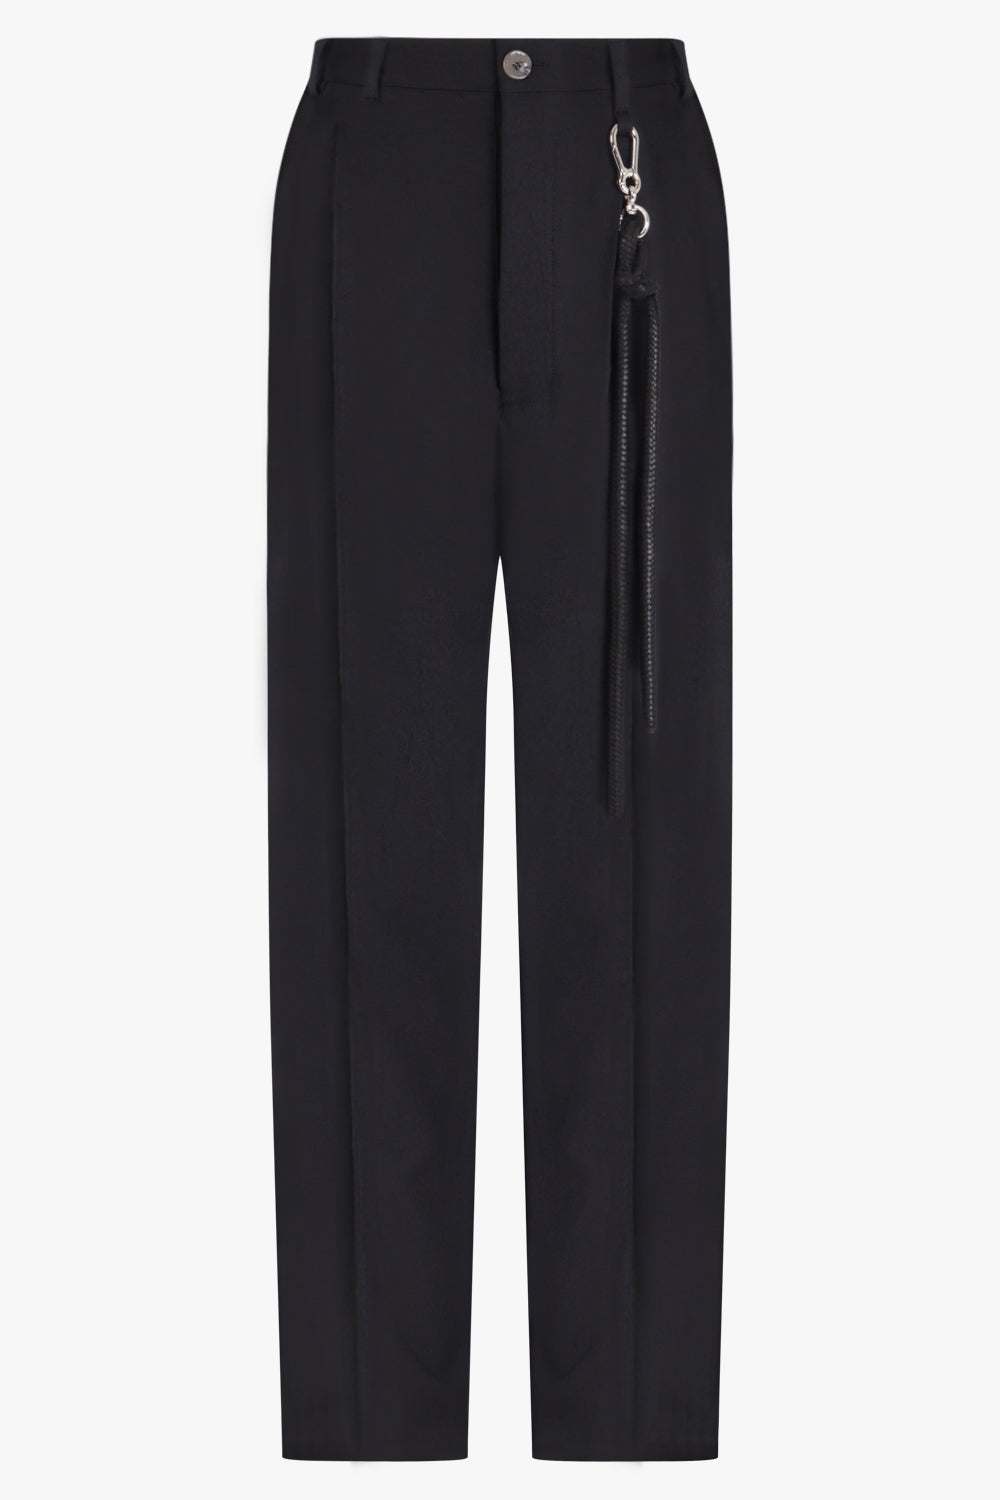 SONG FOR THE MUTE LOUNGE PANT CAMEL NEW SEASON PARLOUR X ONLINE SYDNEY –  Parlour X